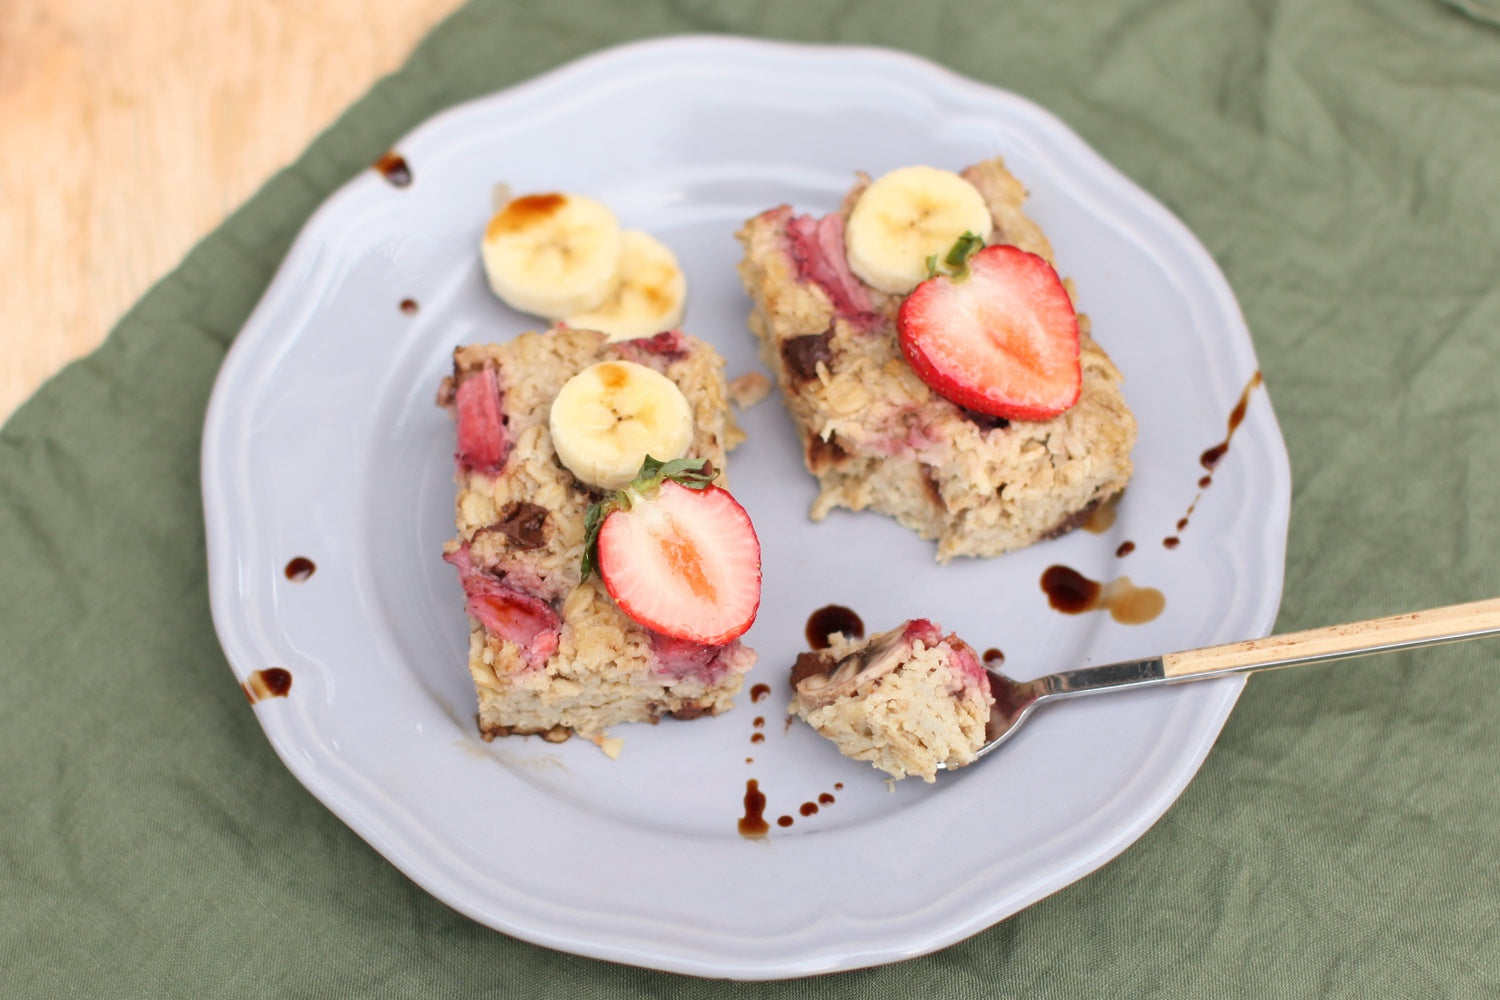 Baked Oatmeal with Strawberry & Banana